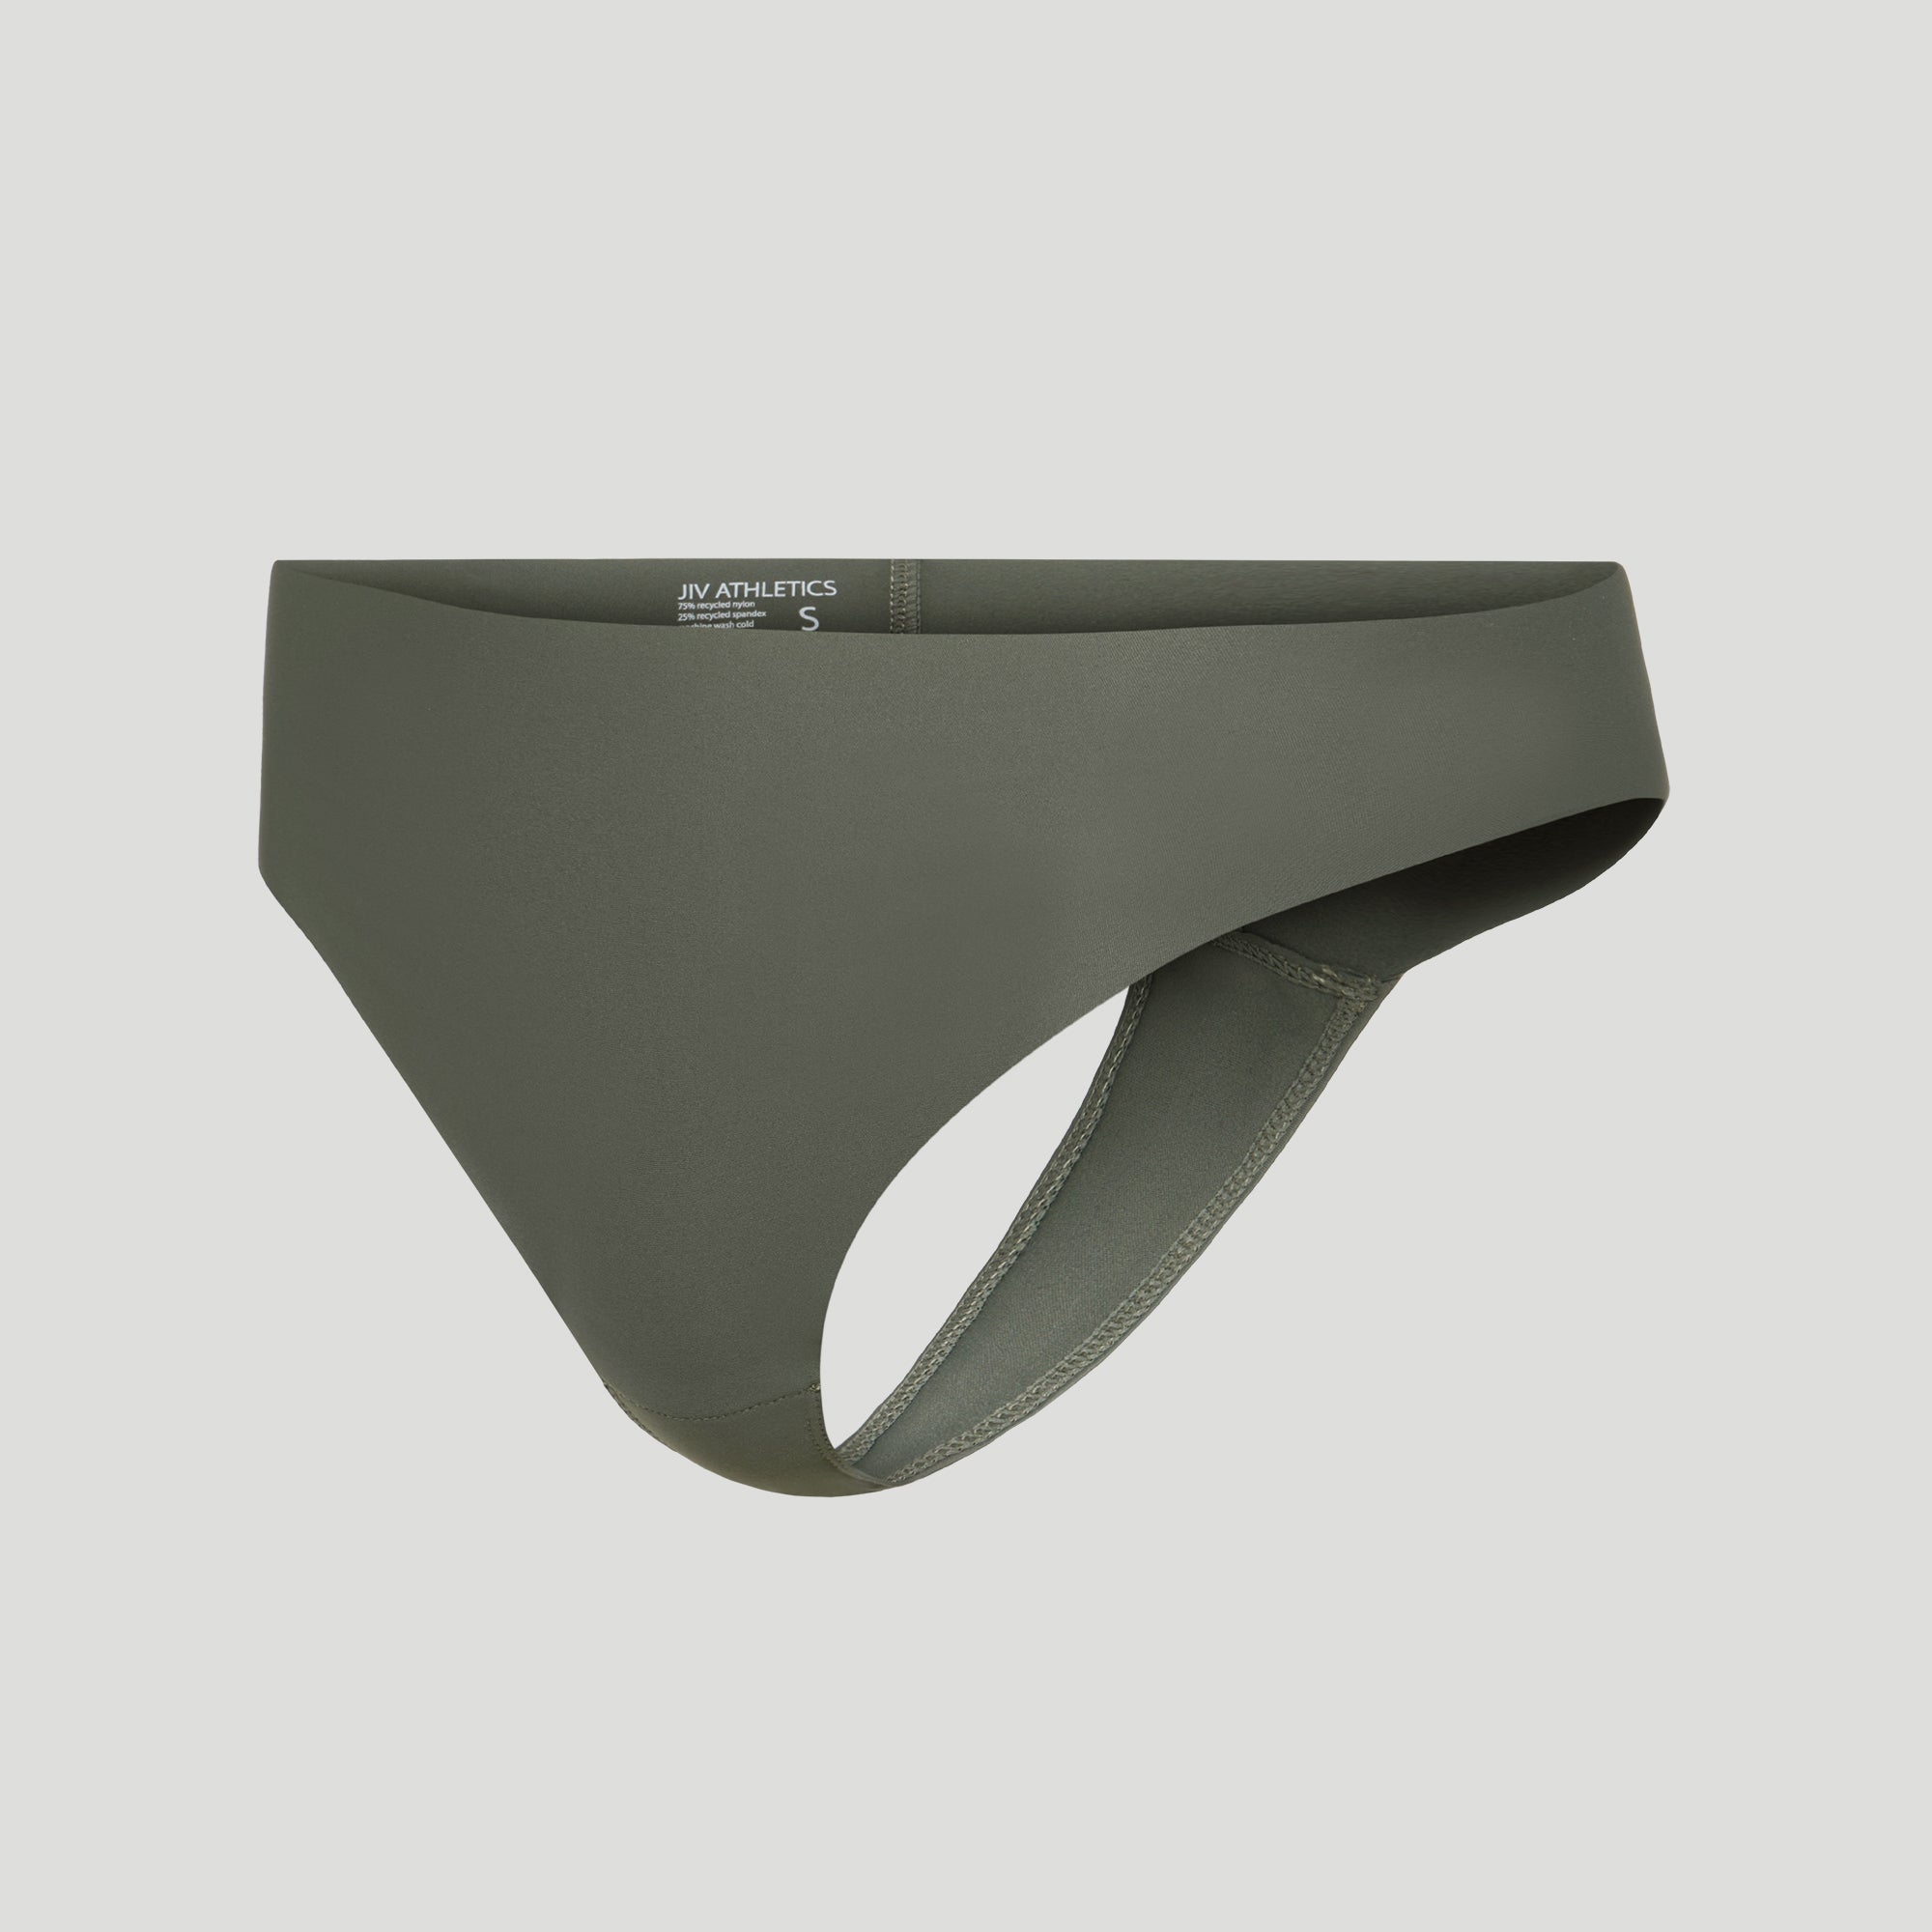 JIV ATHLETICS The Cameltoe Proof High Rise Thong in Sand